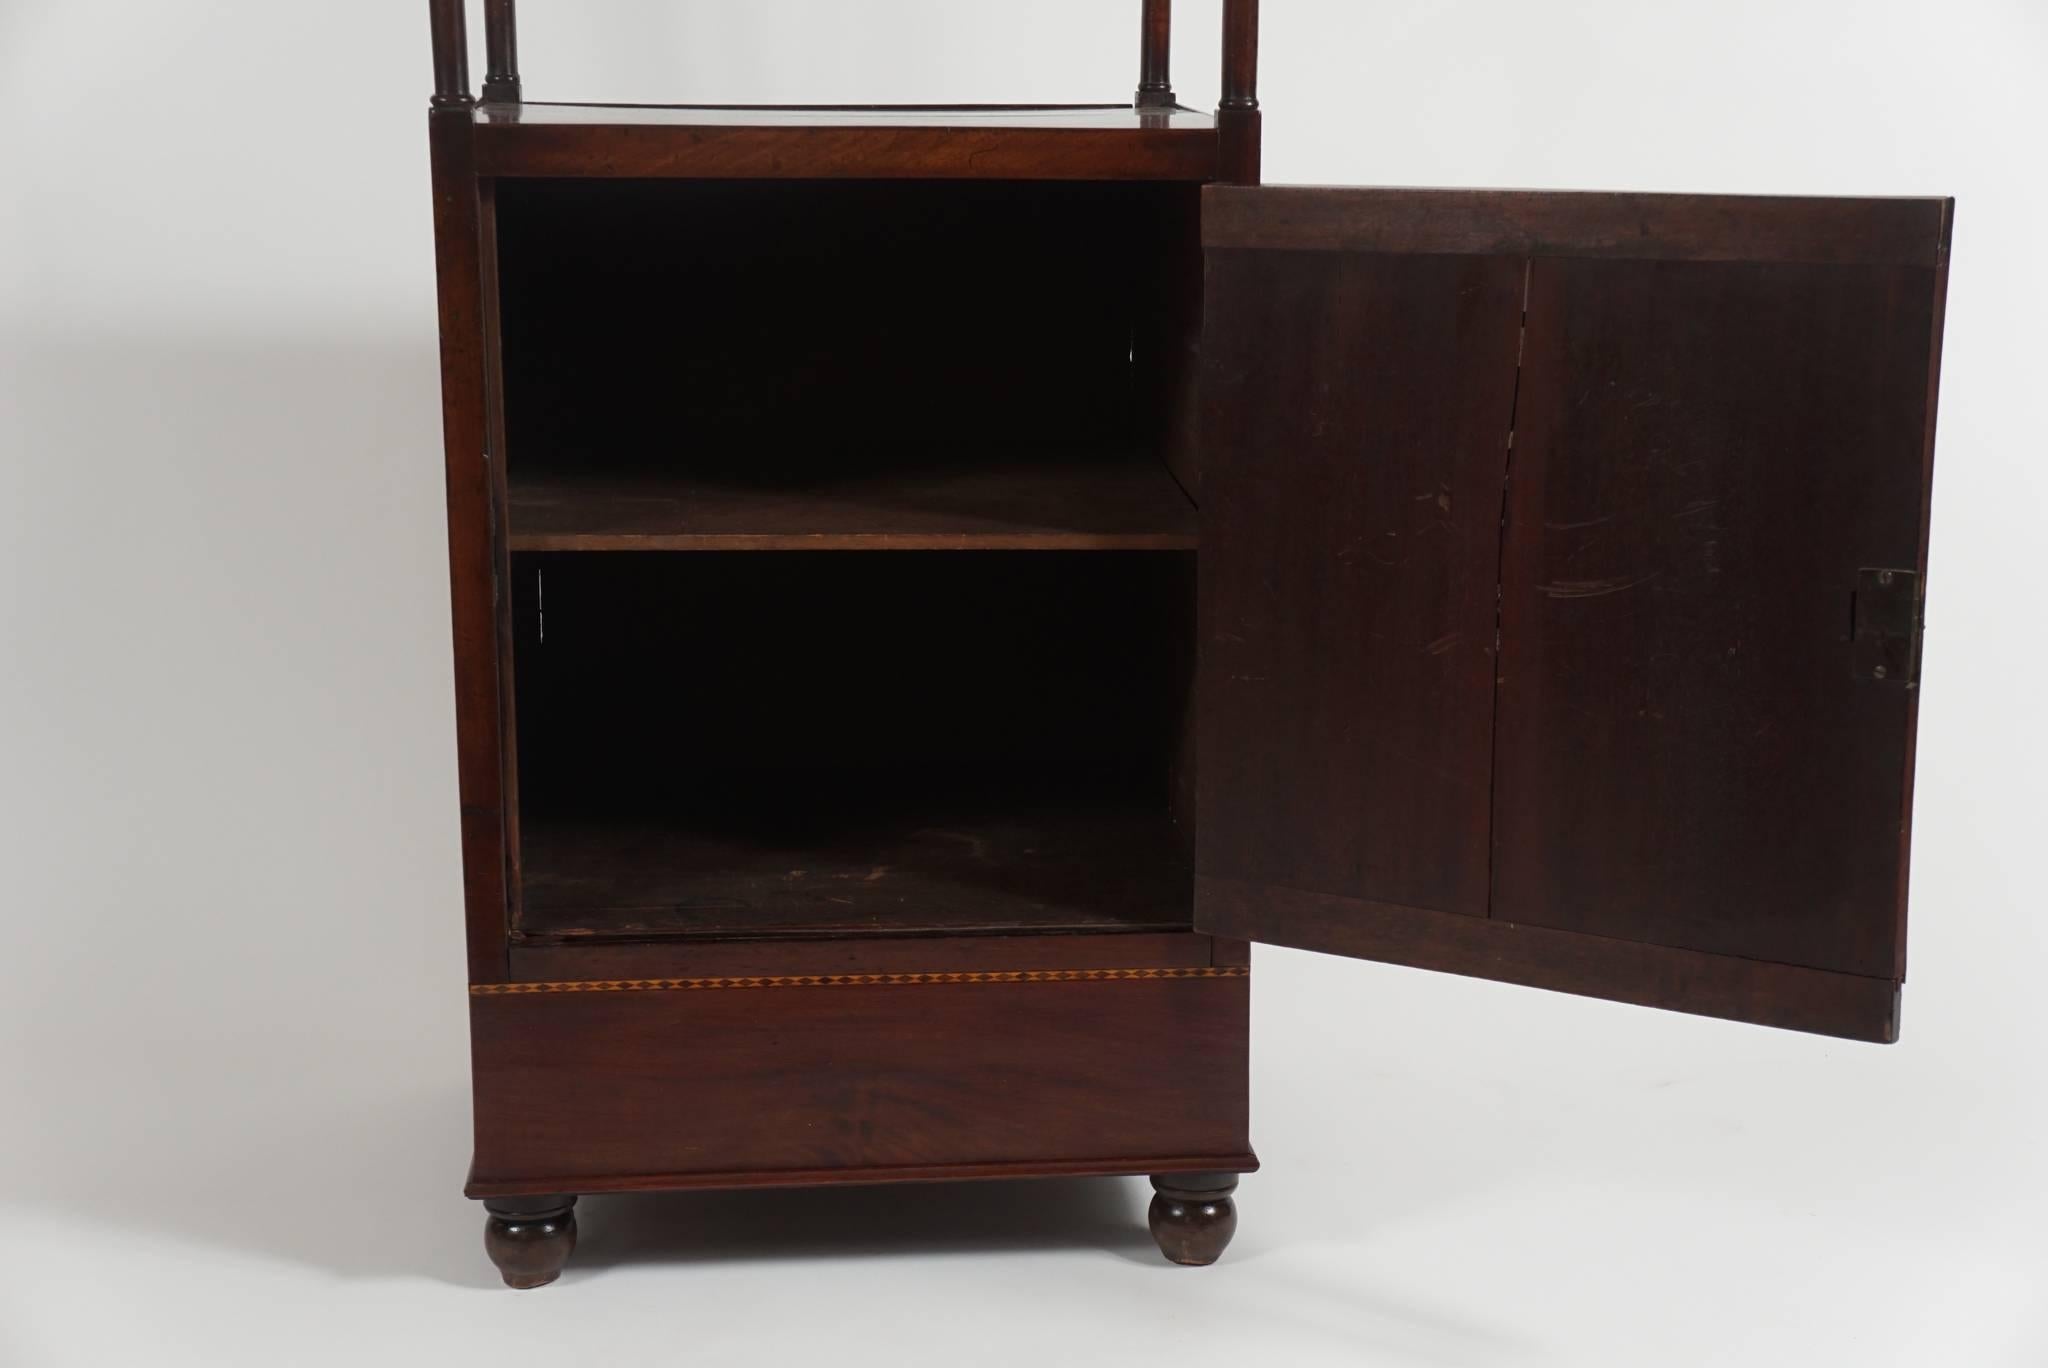 English Regency Period Mahogany Étagère or Library Stand, circa 1815 For Sale 1